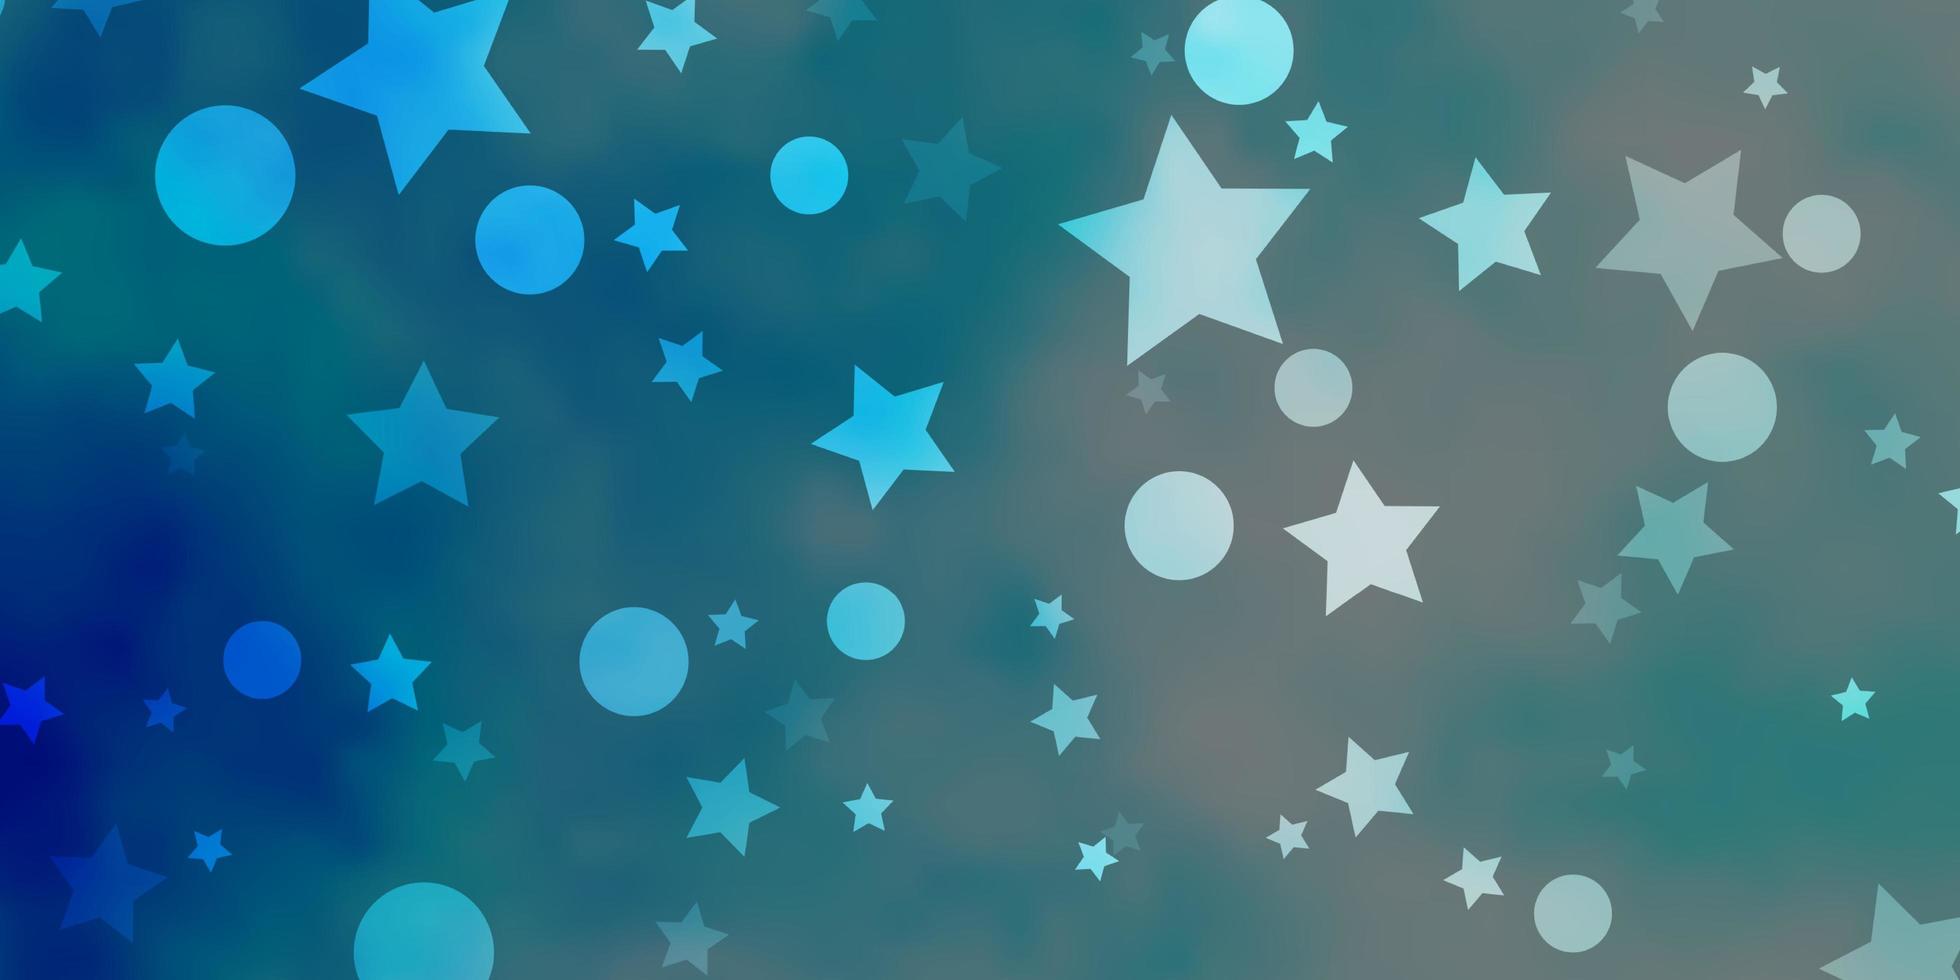 Light BLUE vector background with circles stars Abstract design in gradient style with bubbles stars Pattern for trendy fabric wallpapers